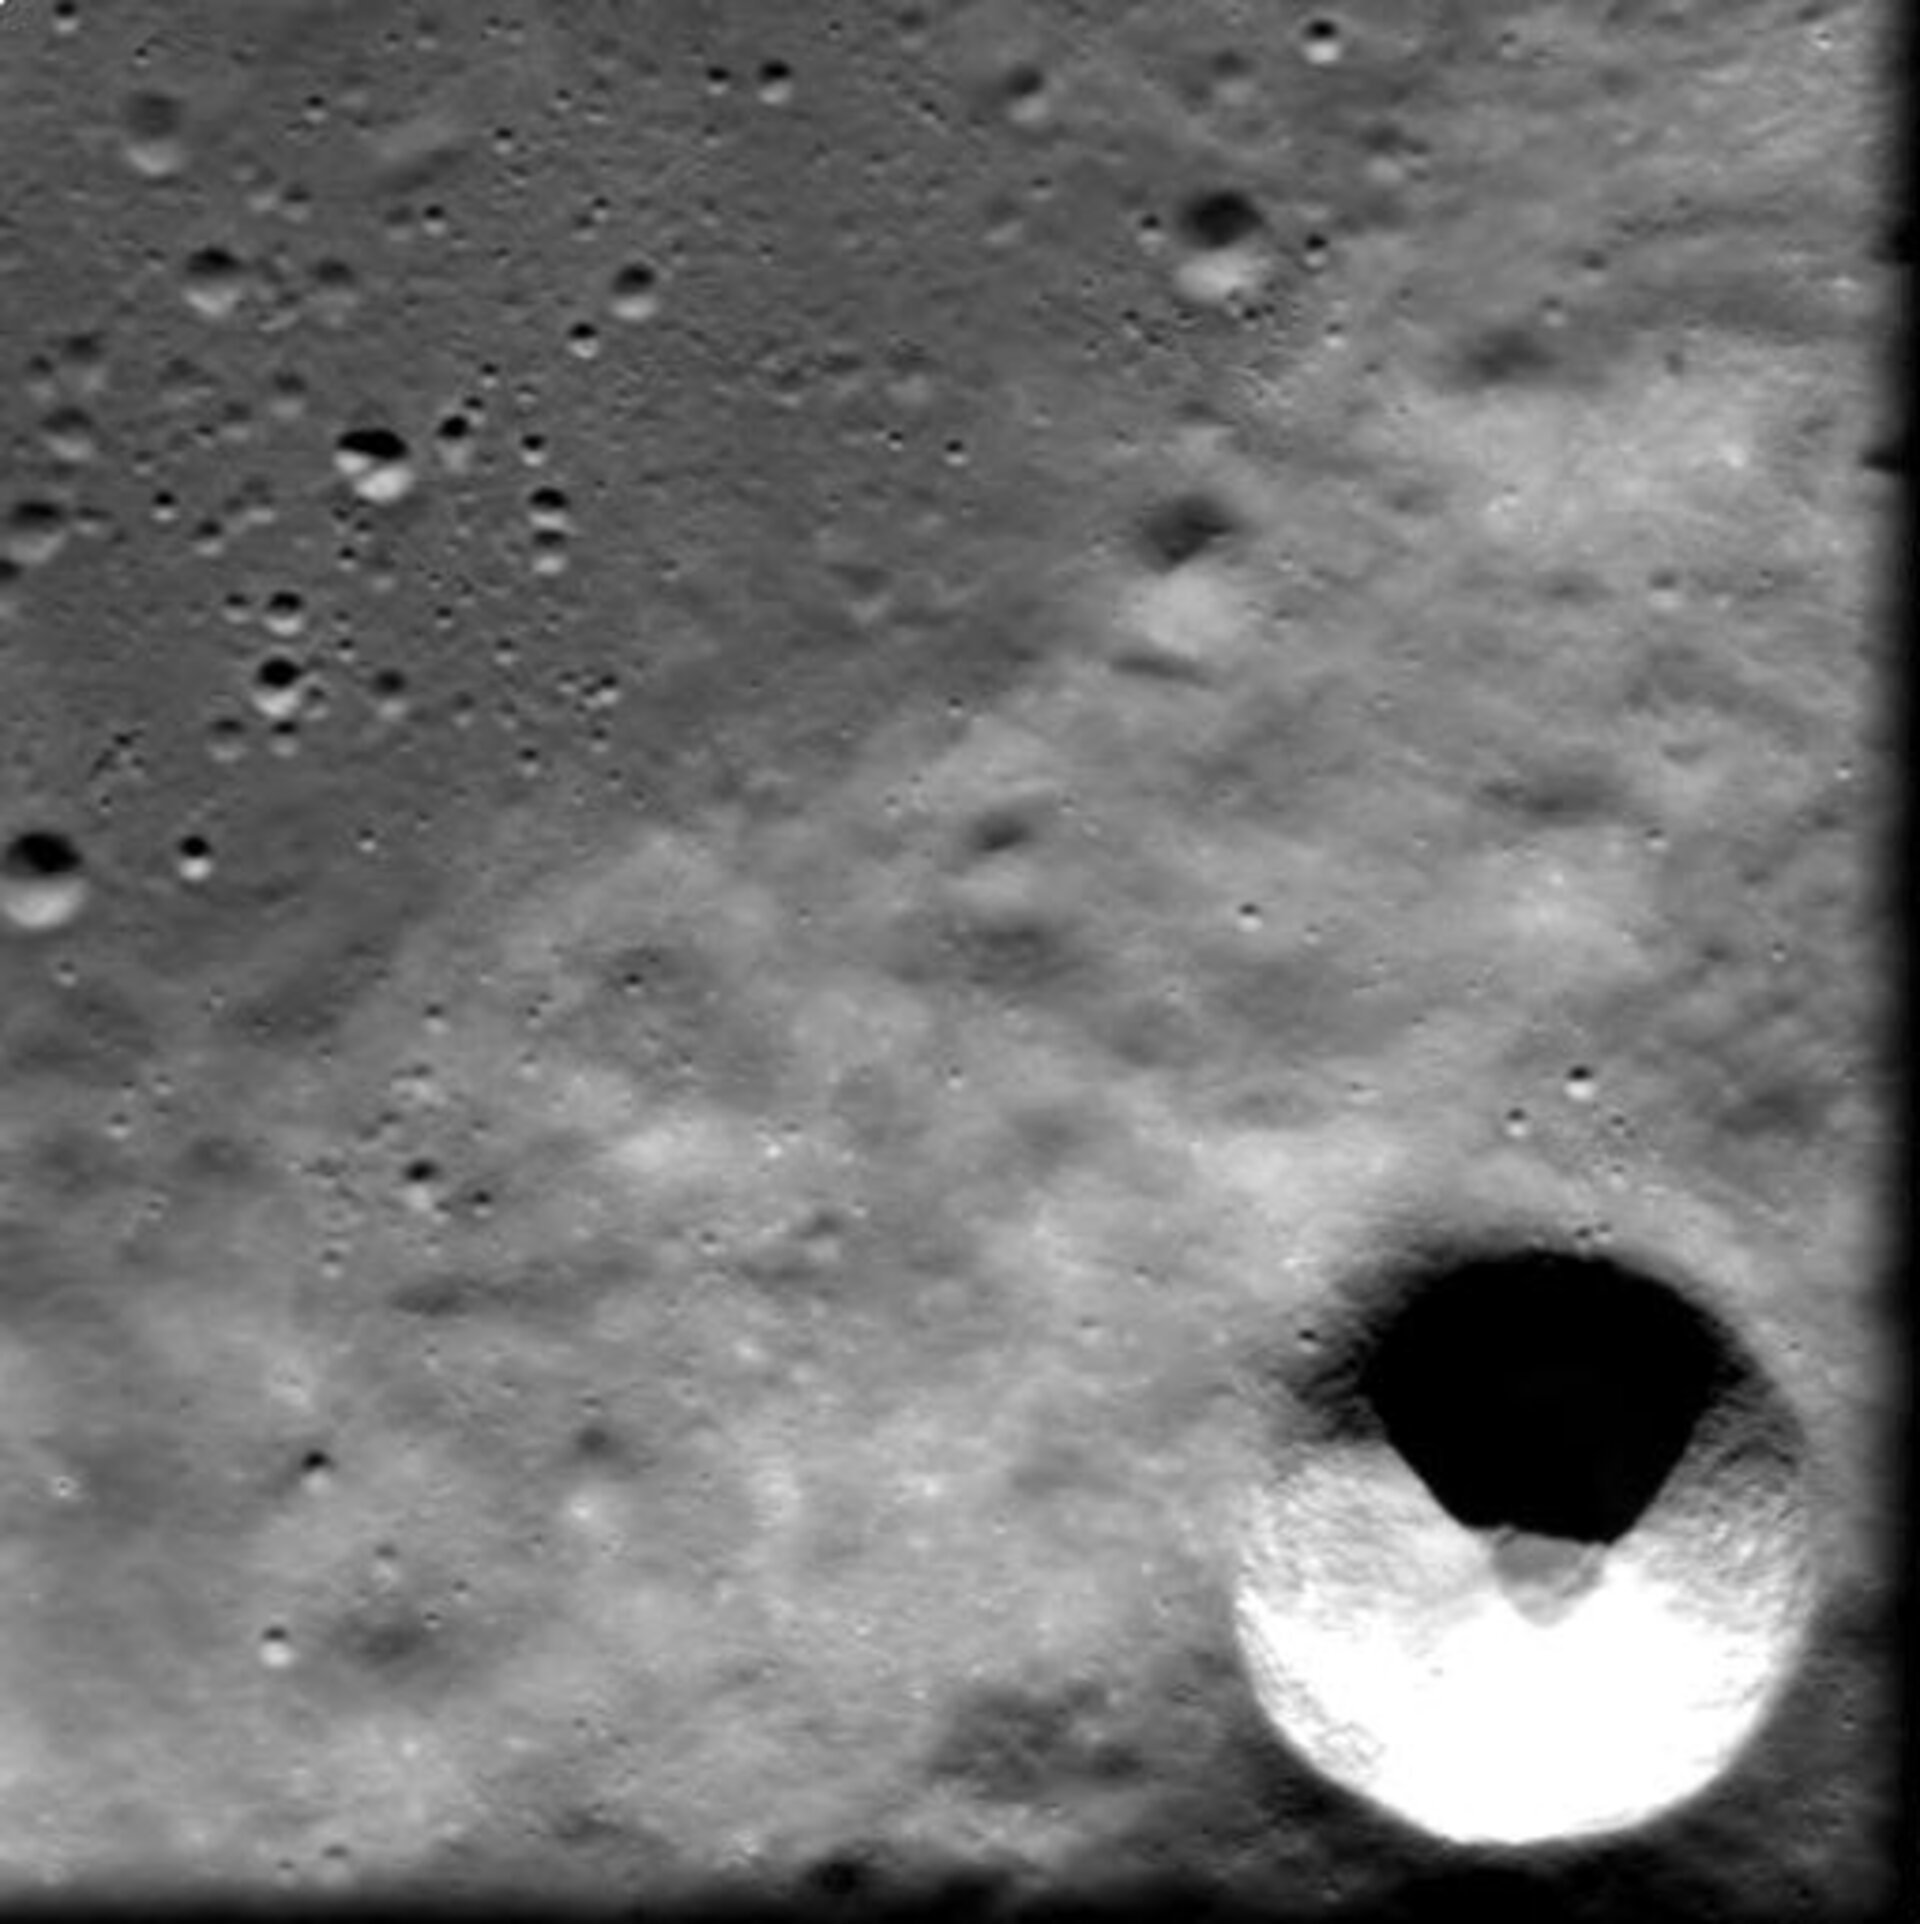 Young crater ‘Cuvier C’ as seen by SMART-1